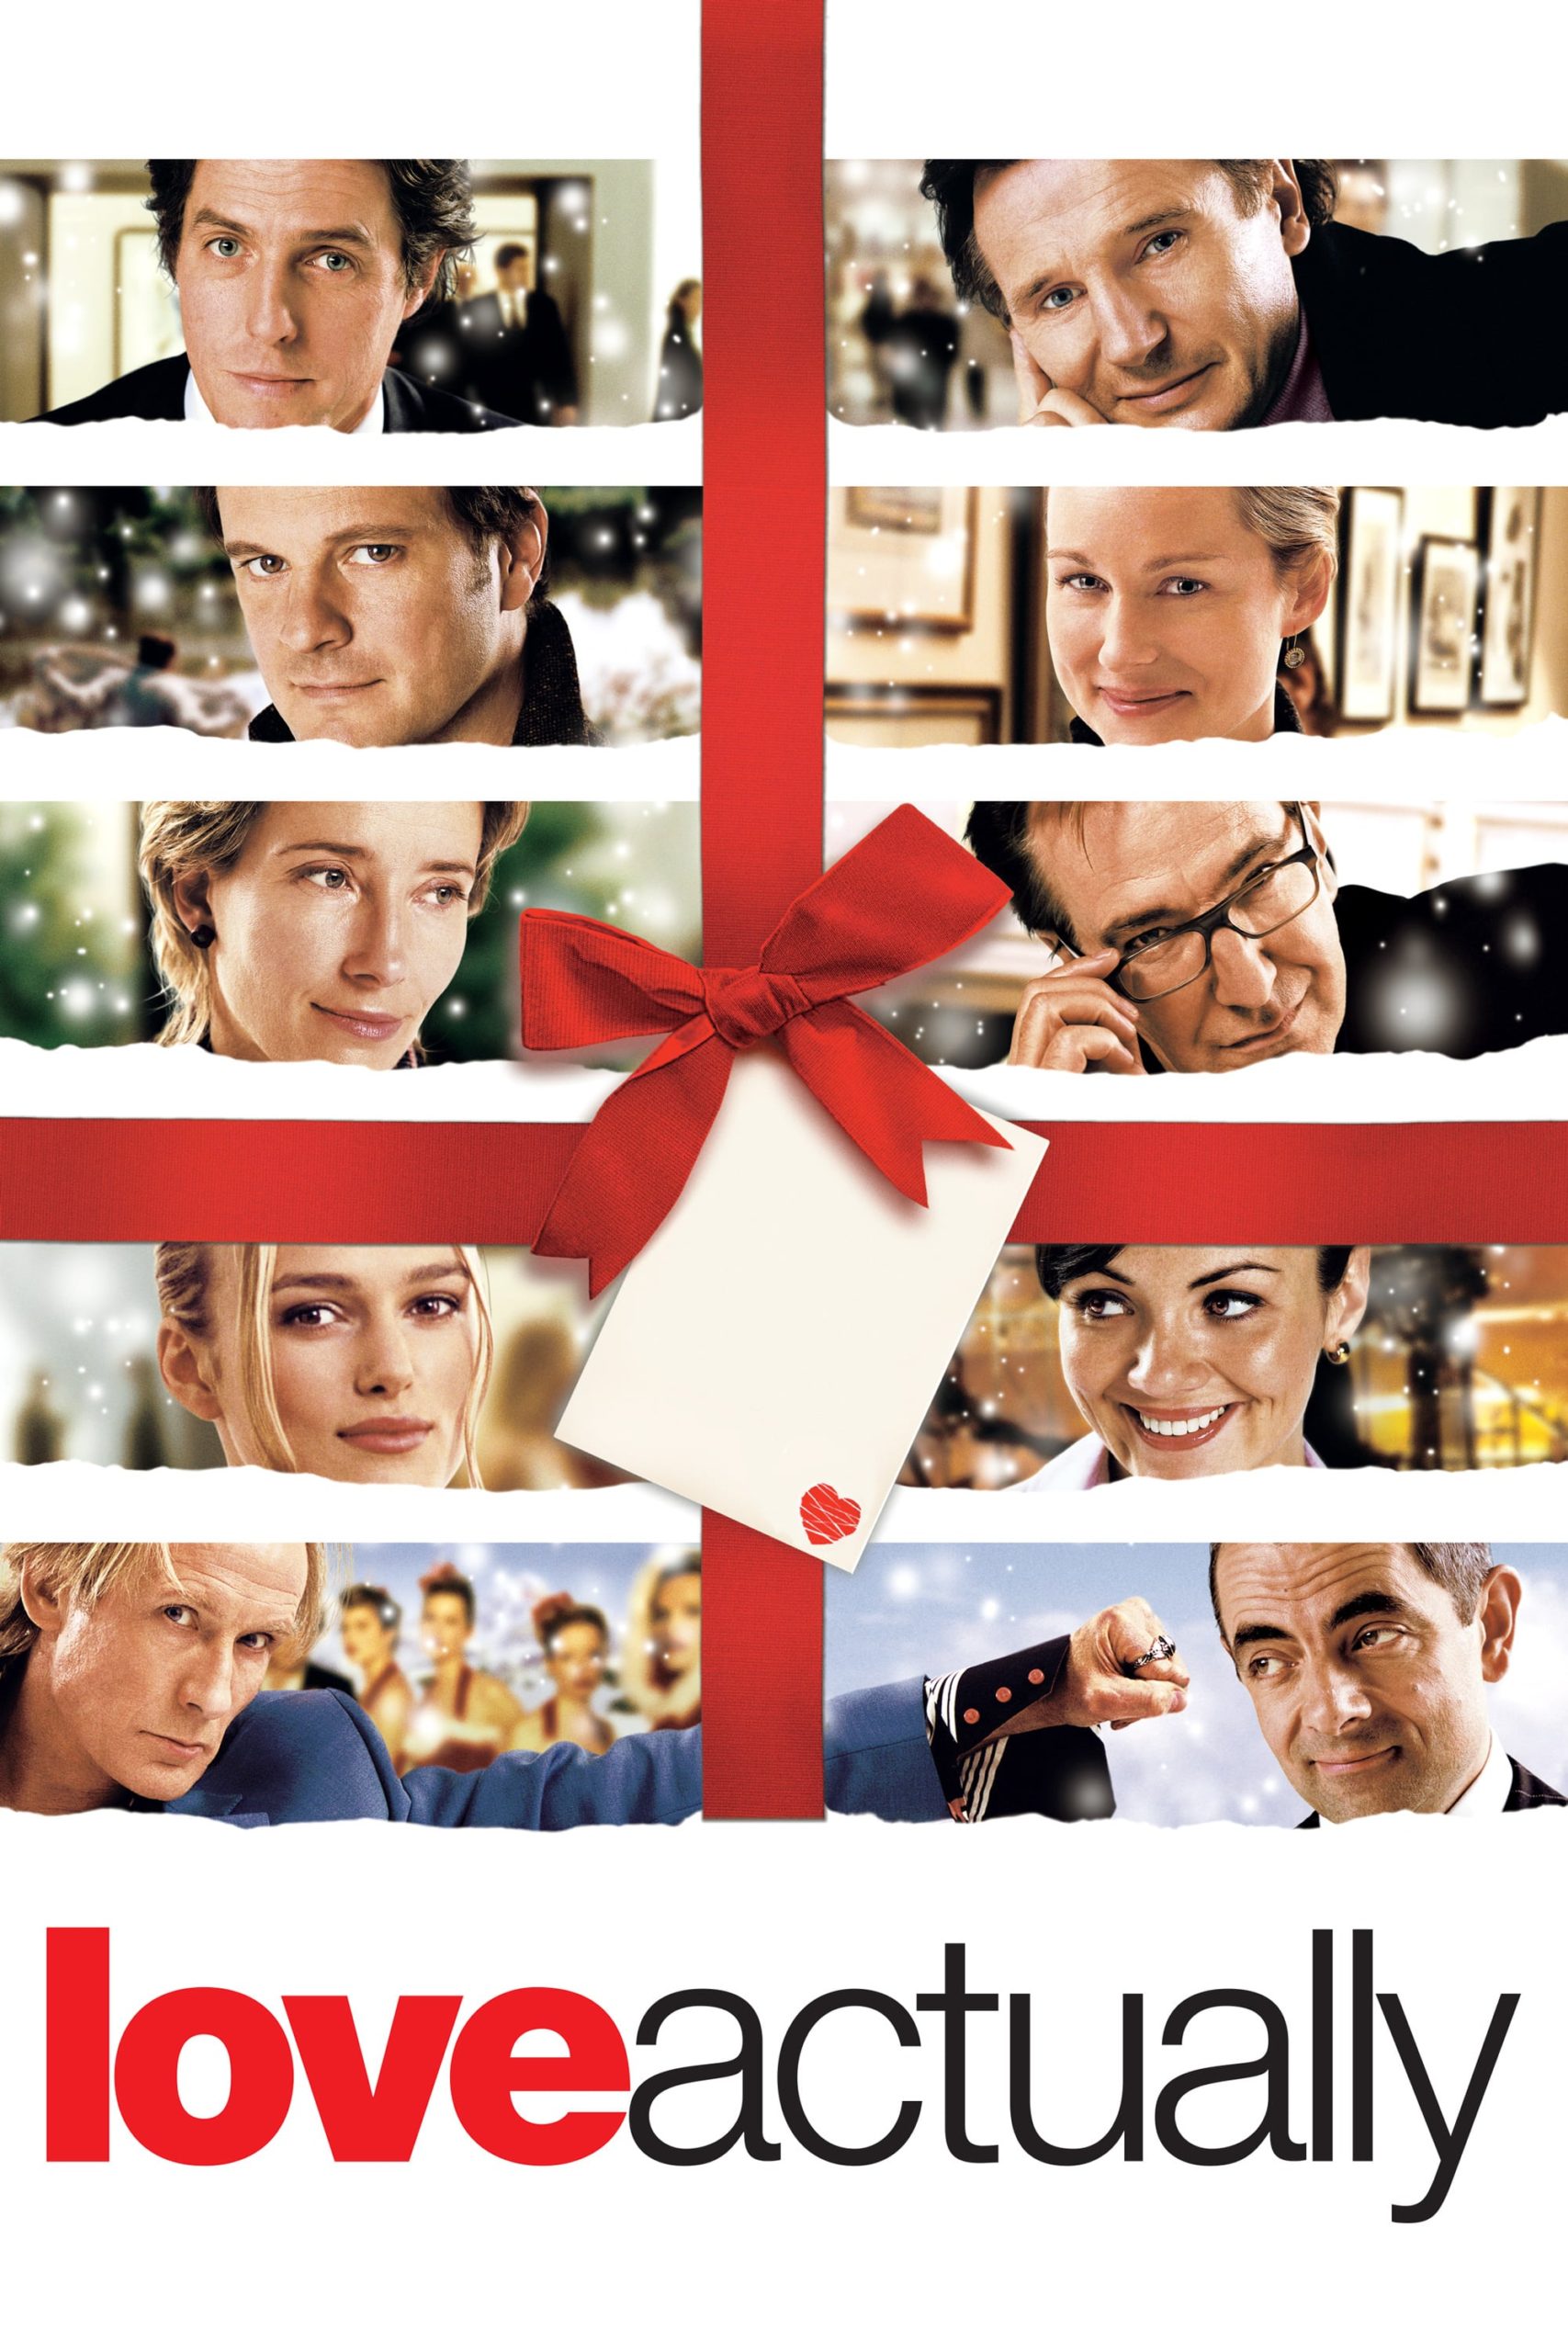 Ten of the main characters faces are seen on the promotional poster which is wrapped in red ribbon.